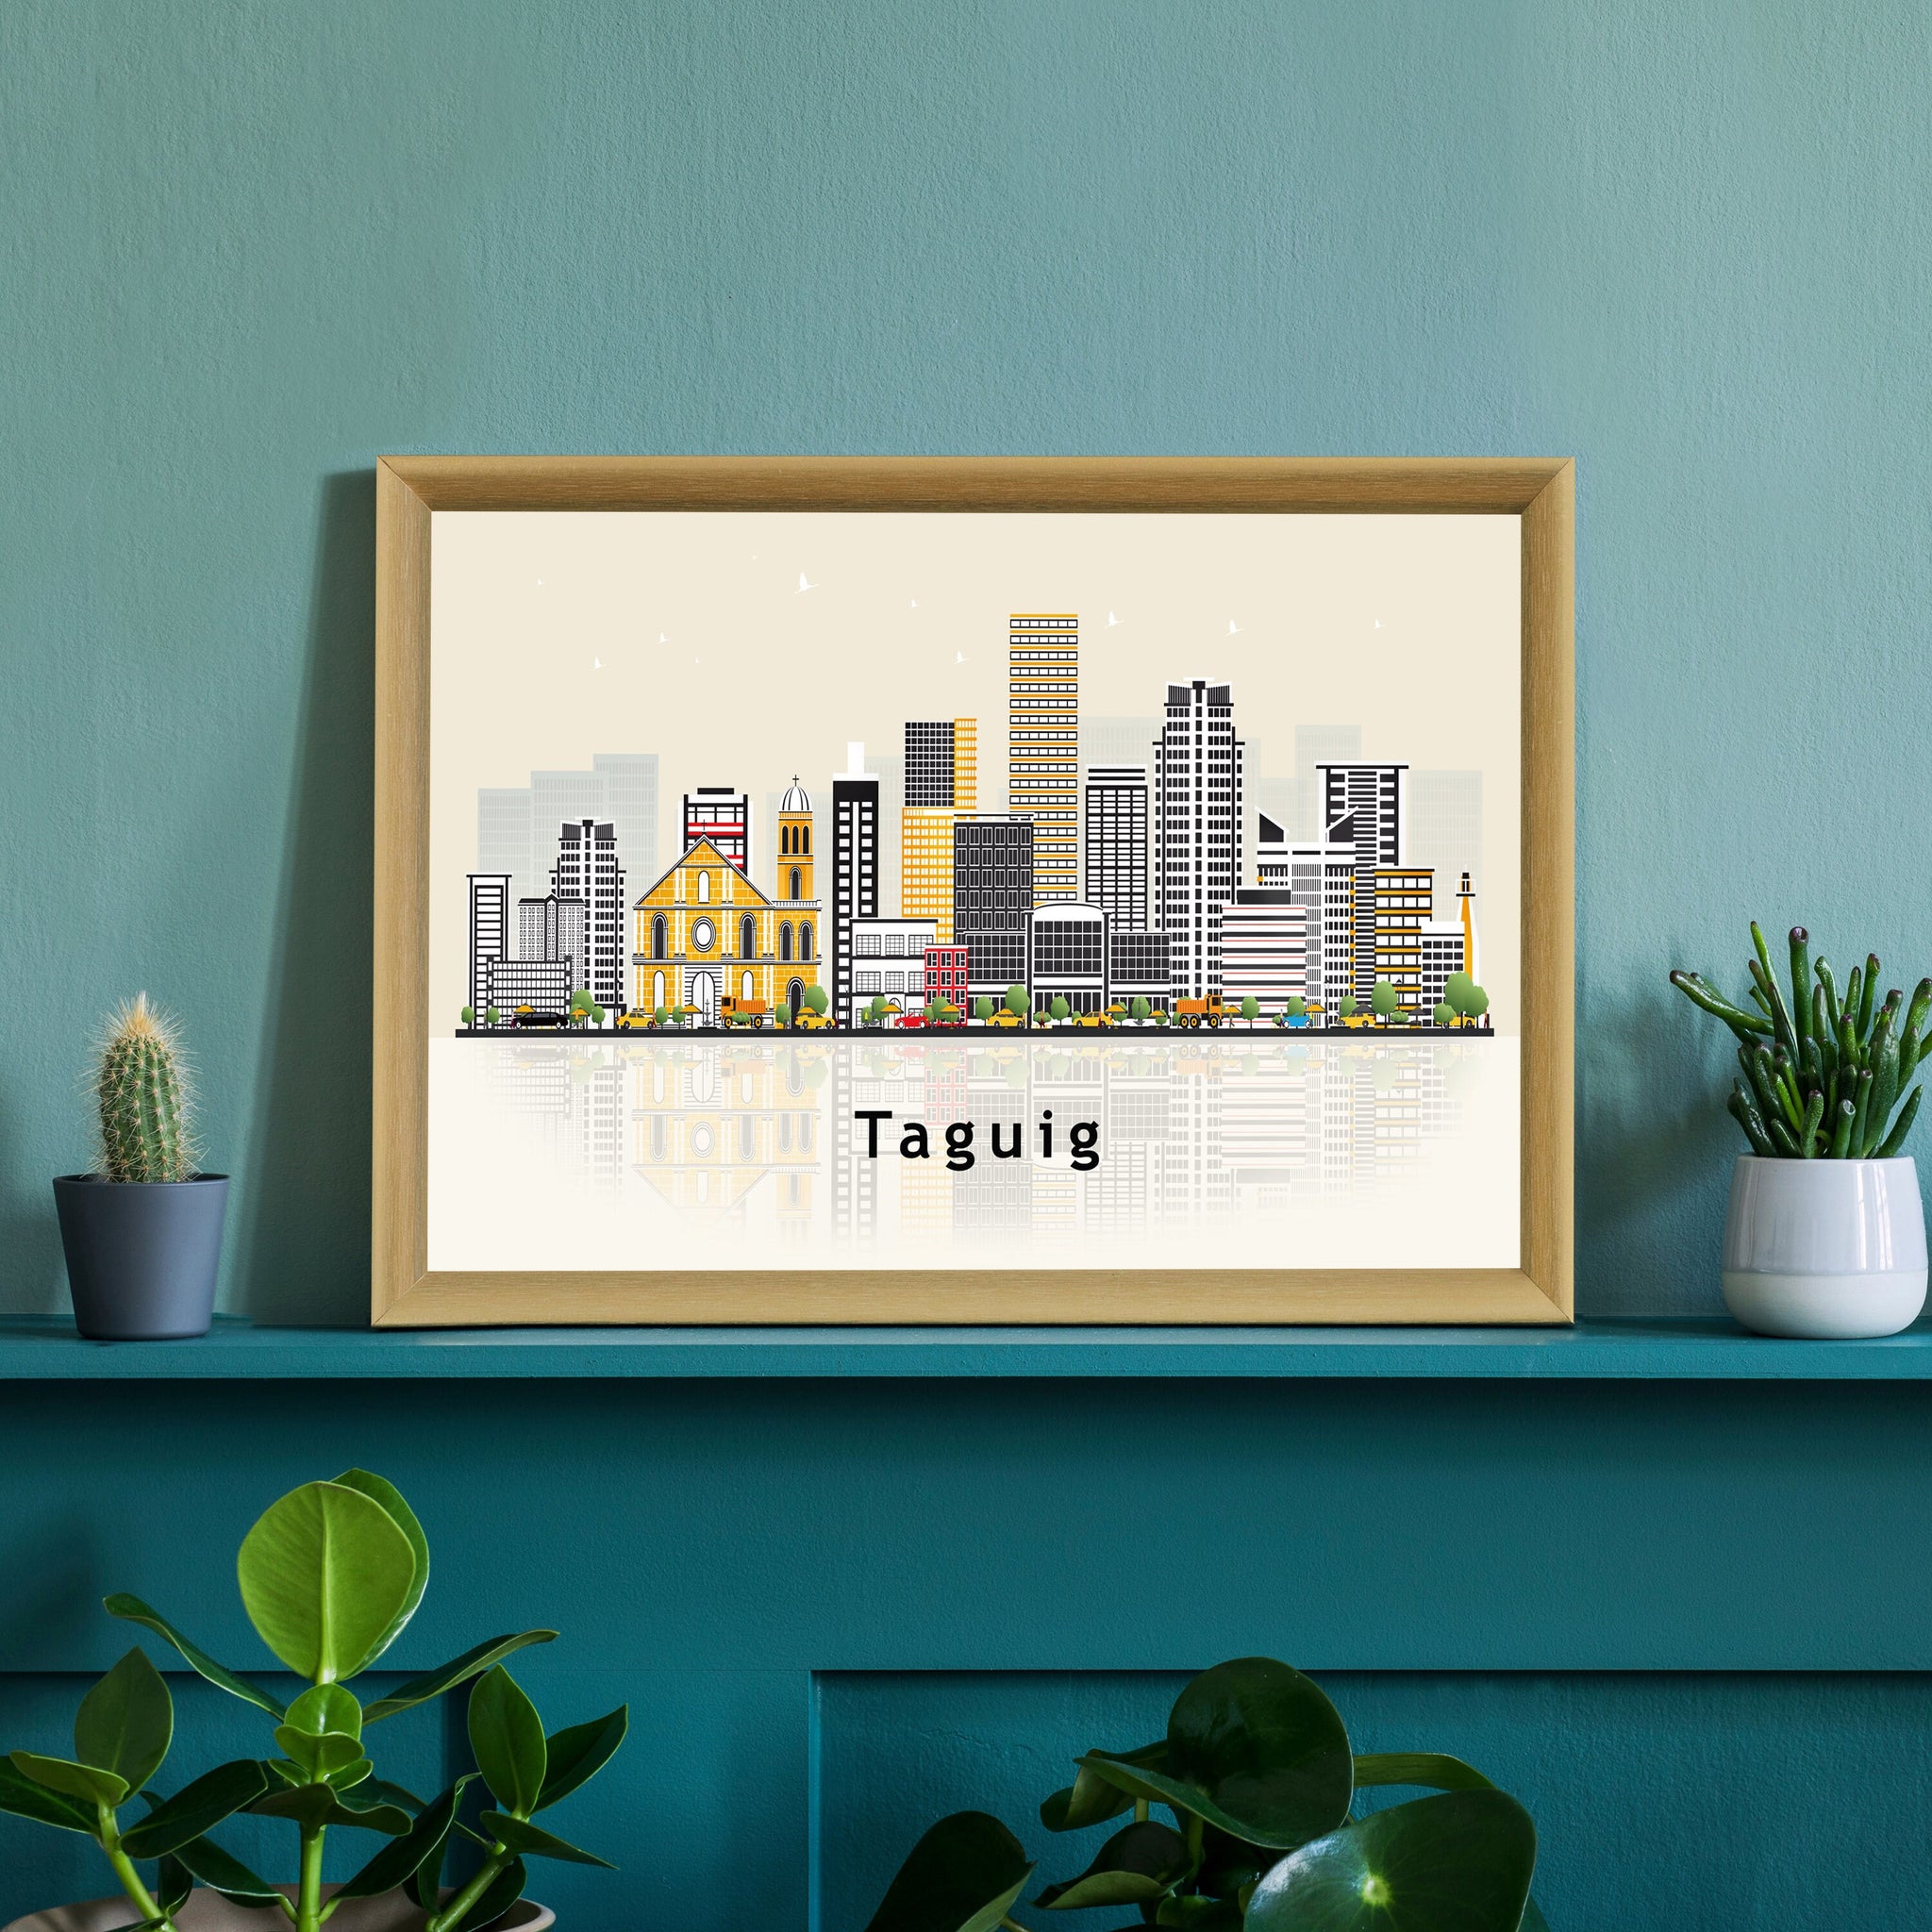 TAGUIG PHILIPPINES Illustration skyline poster, Modern skyline cityscape poster, Taguig skyline landmark map poster, Home wall decorations